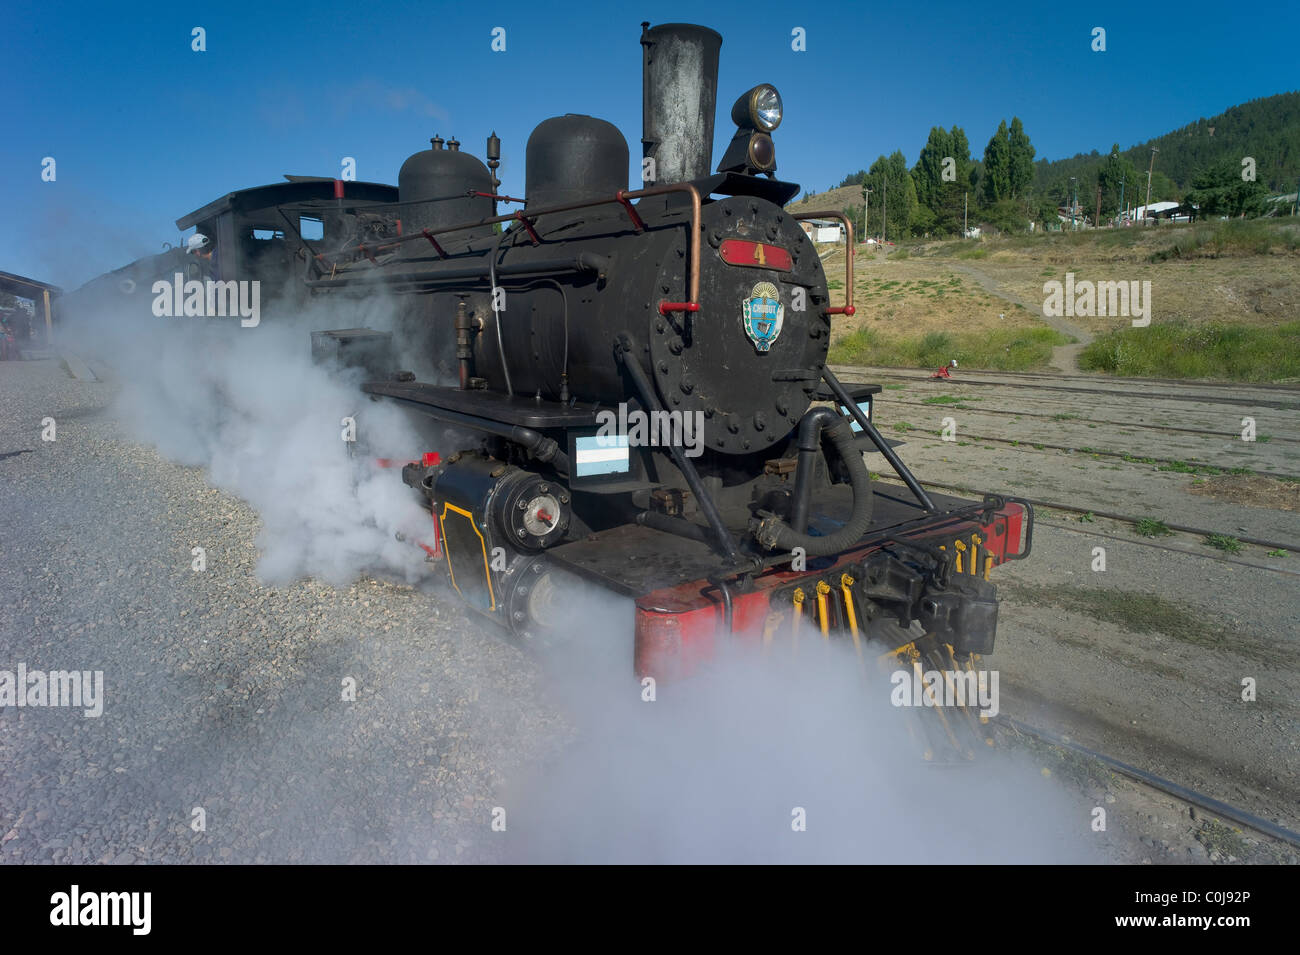 Locomotive of the Old Patagonia Express, Esquel, Chubut, Argentina Stock Photo